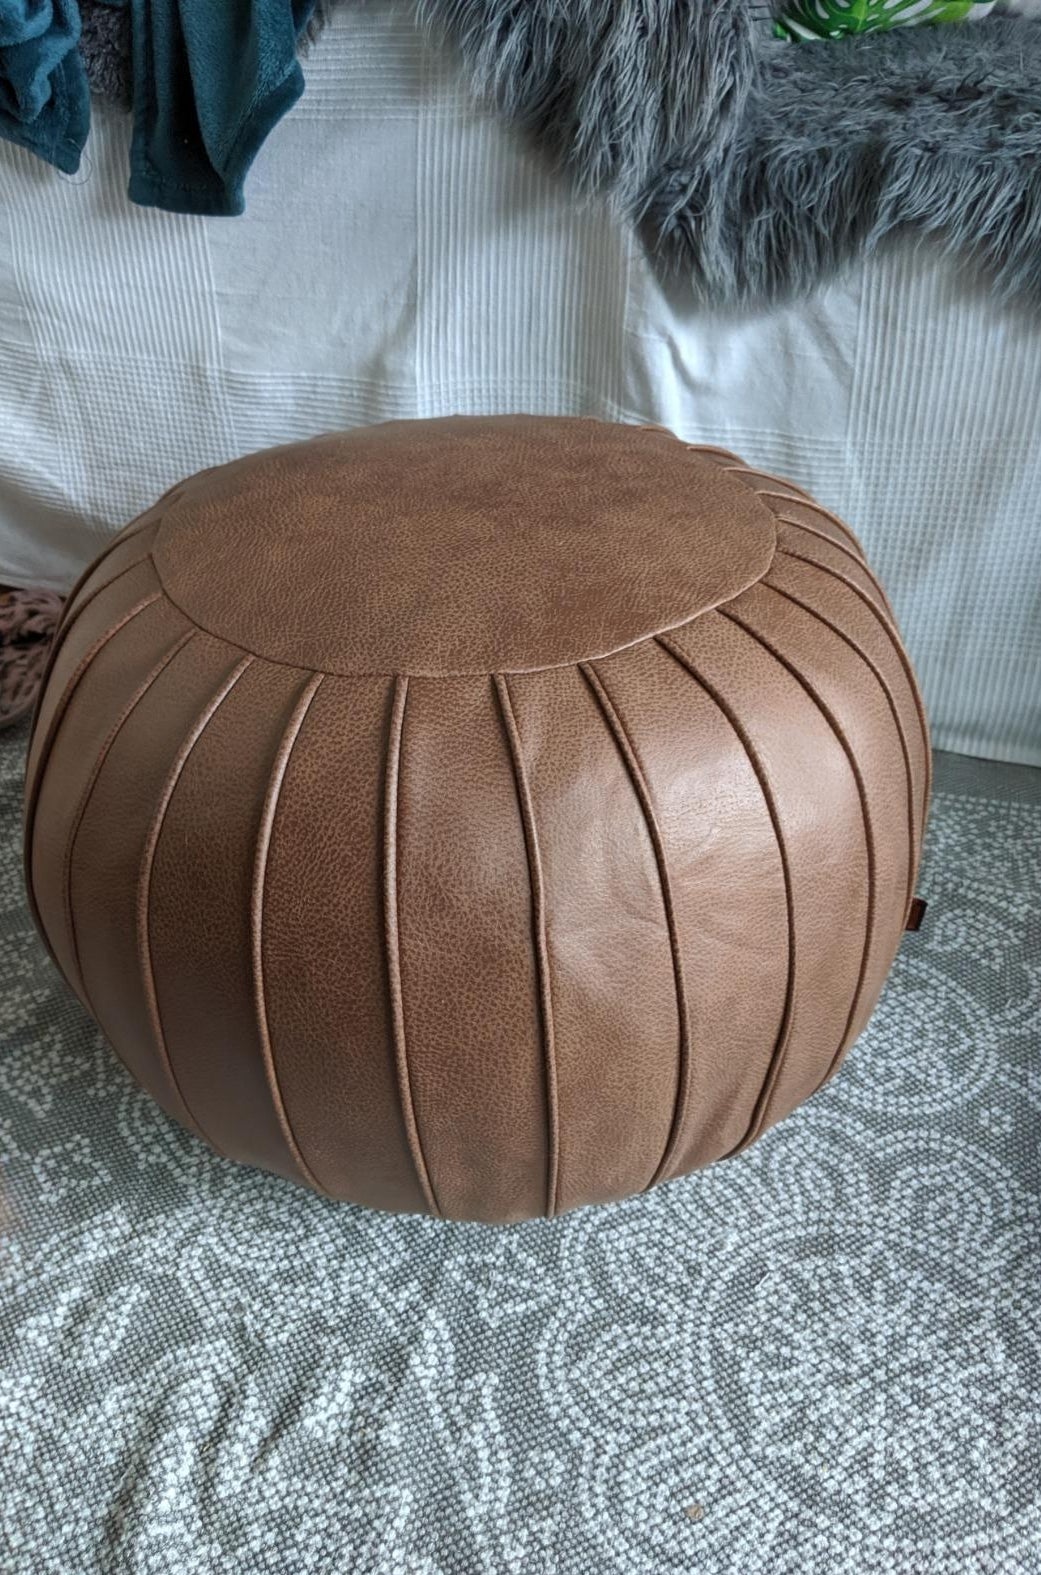 The brown circular pouf with a vertical line pattern around the entire thing 